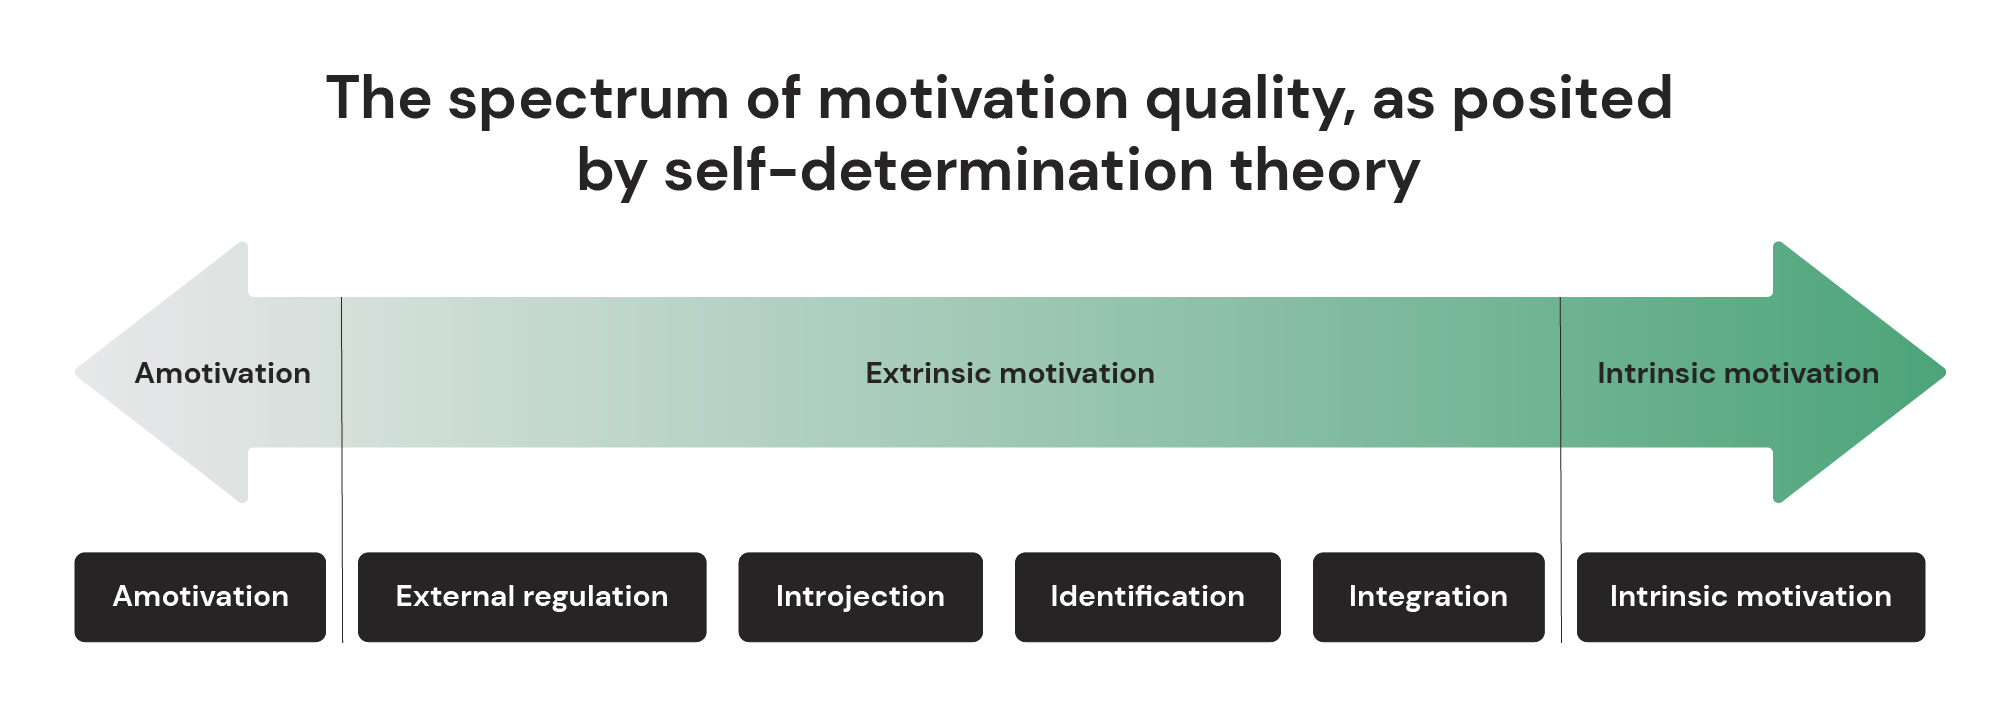 The spectrum of motivation quality, as posited by self-determination theory